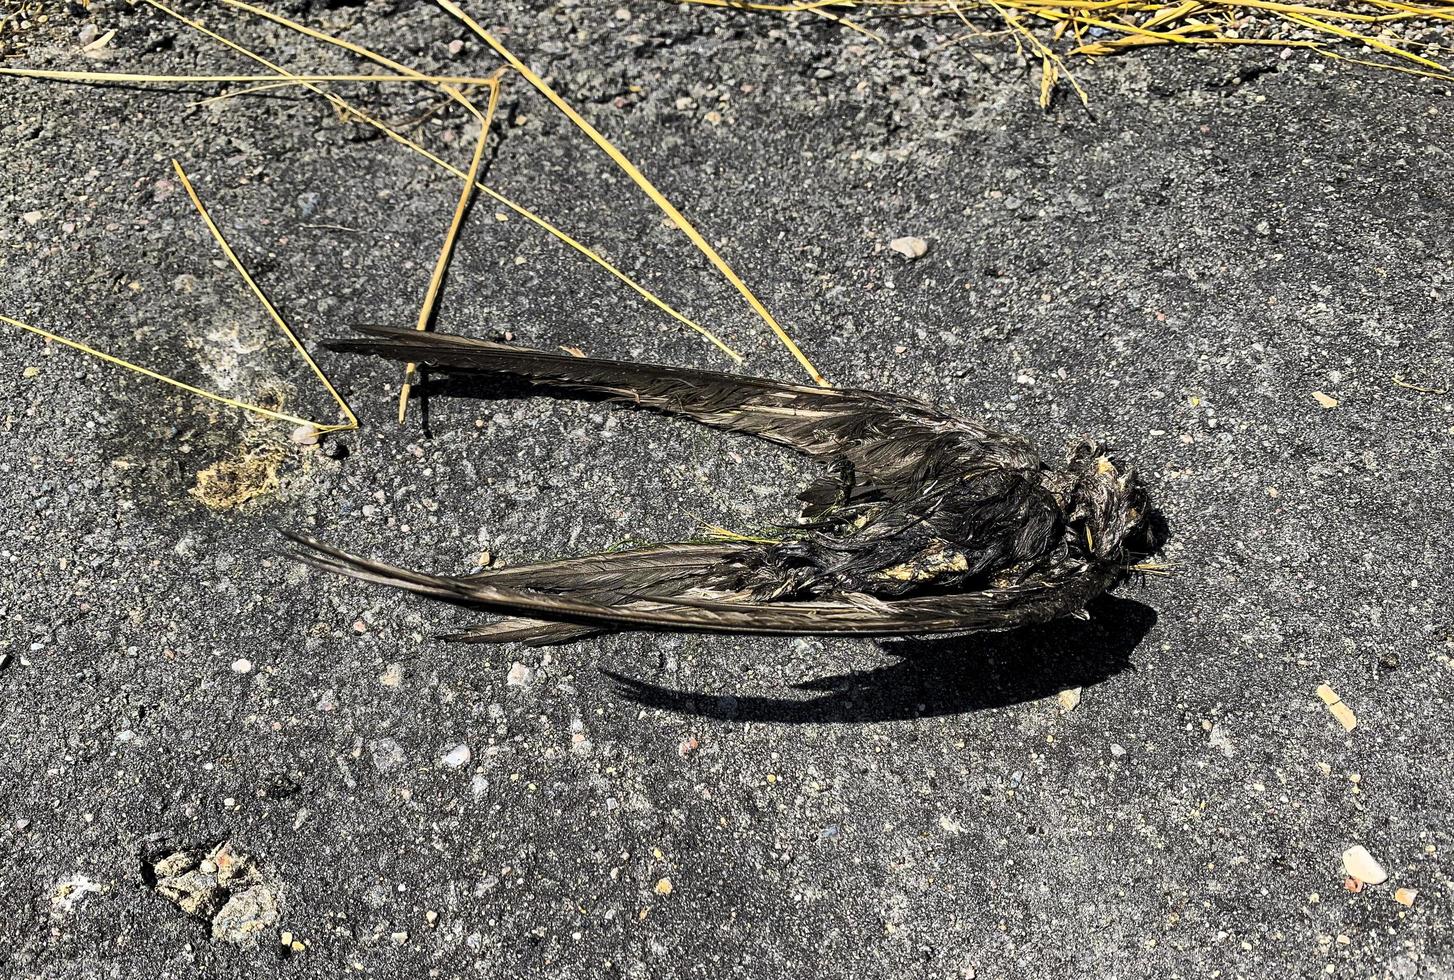 The unfortunate death of a flying bird. swallow. The corpse after death a week later. photo